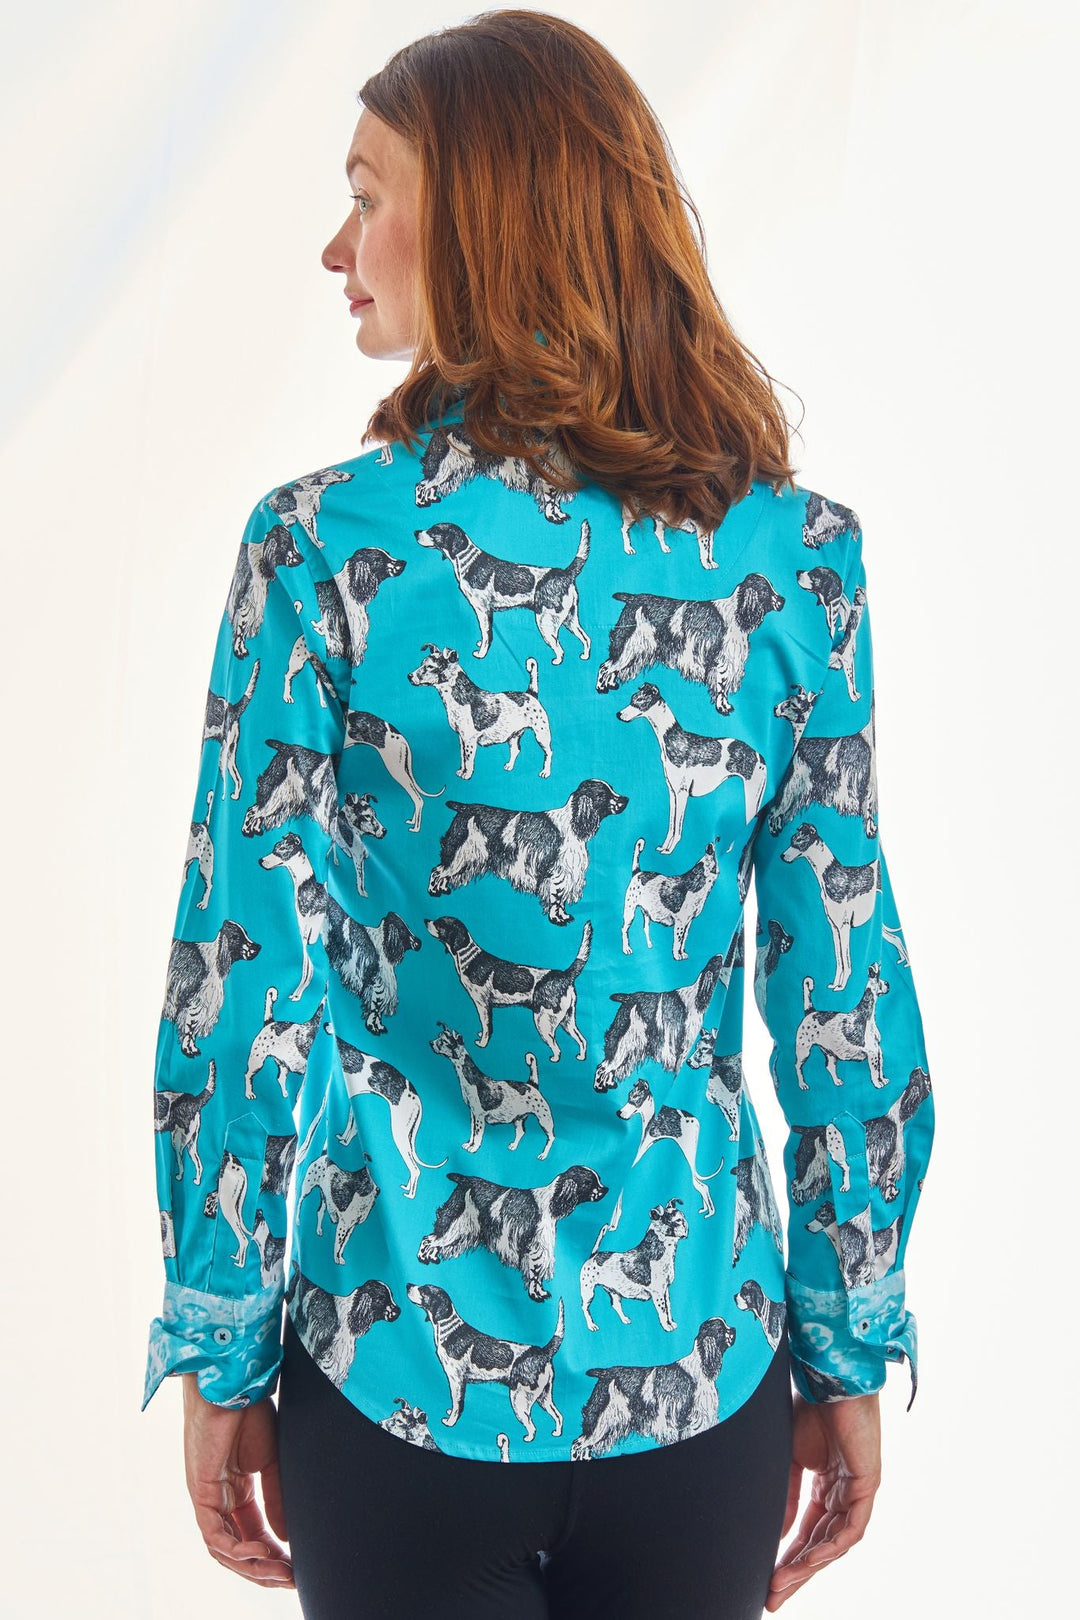 Dizzy-Lizzie Rome Shirt Turquoise Ground Black White Pooches